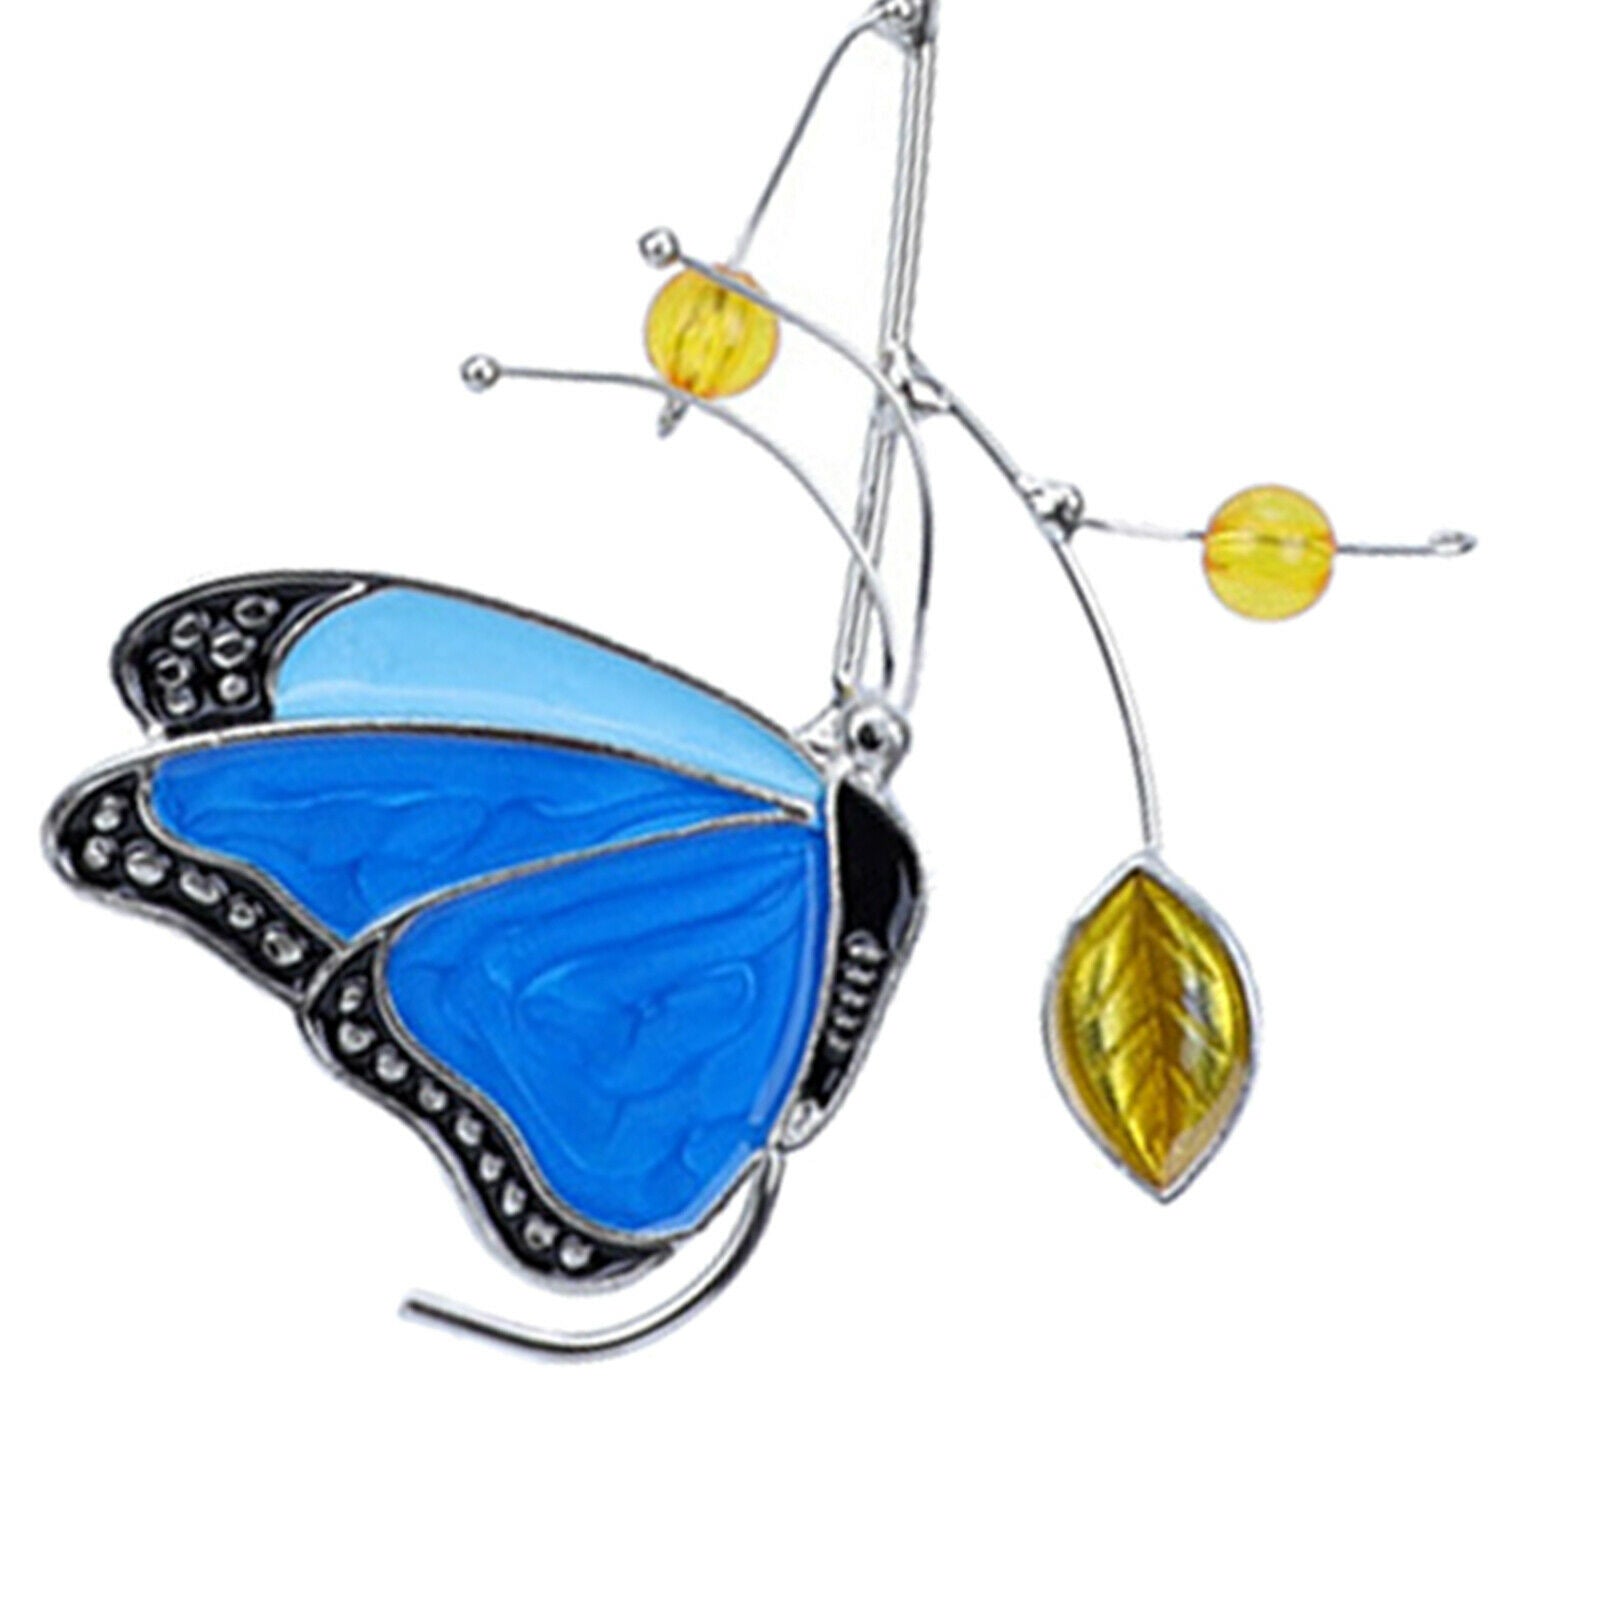 Butterfly Stained Glass Home Window Suncatcher Hanging Panel Yard Decoration